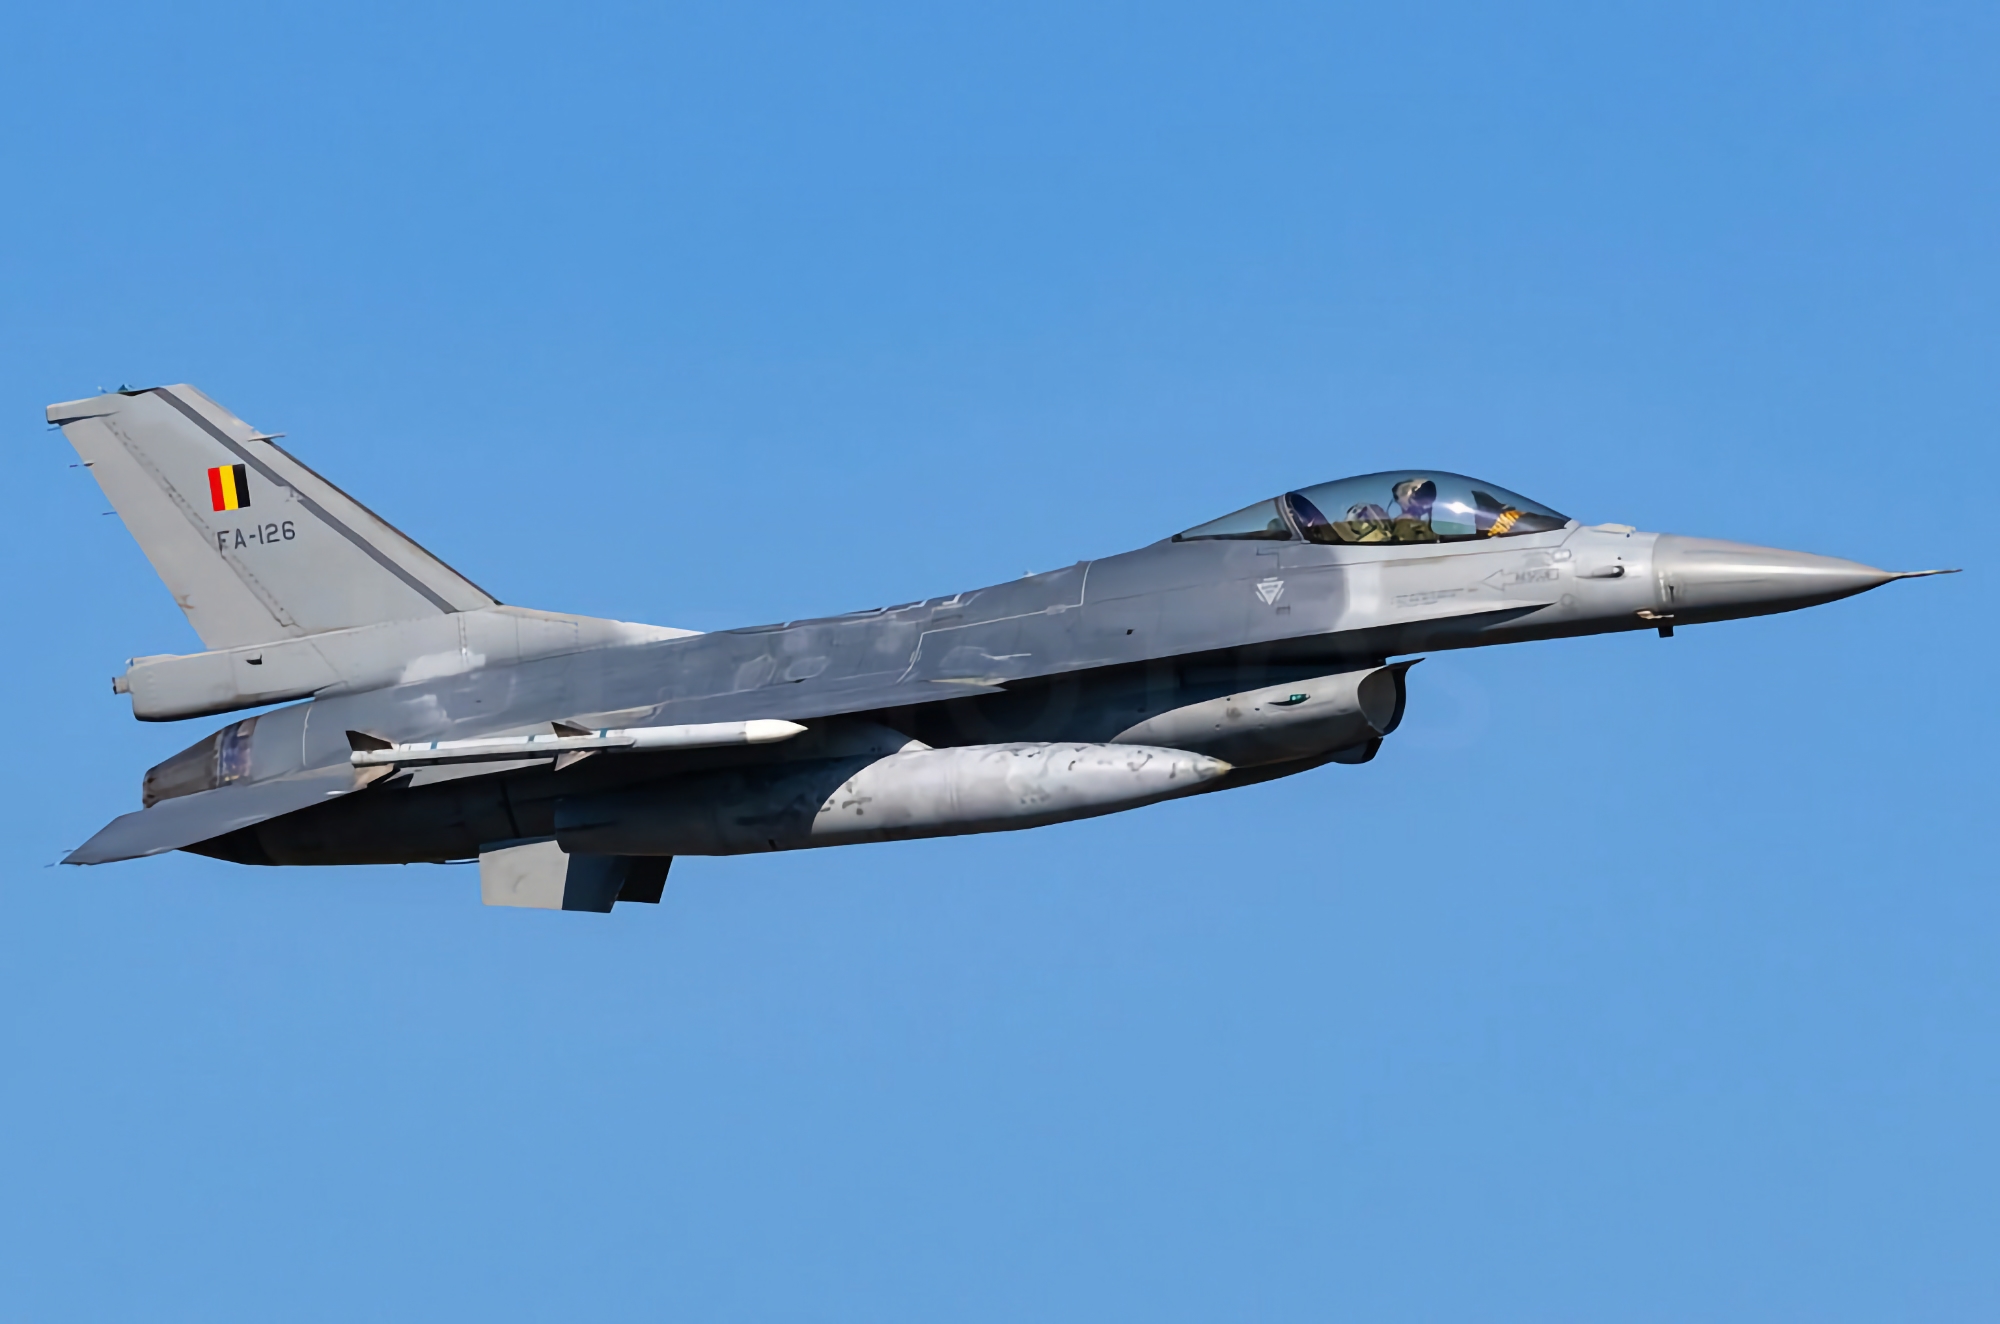 Earlier than expected: Belgium to transfer F-16 Fighting Falcon fighters to Ukraine in 2024